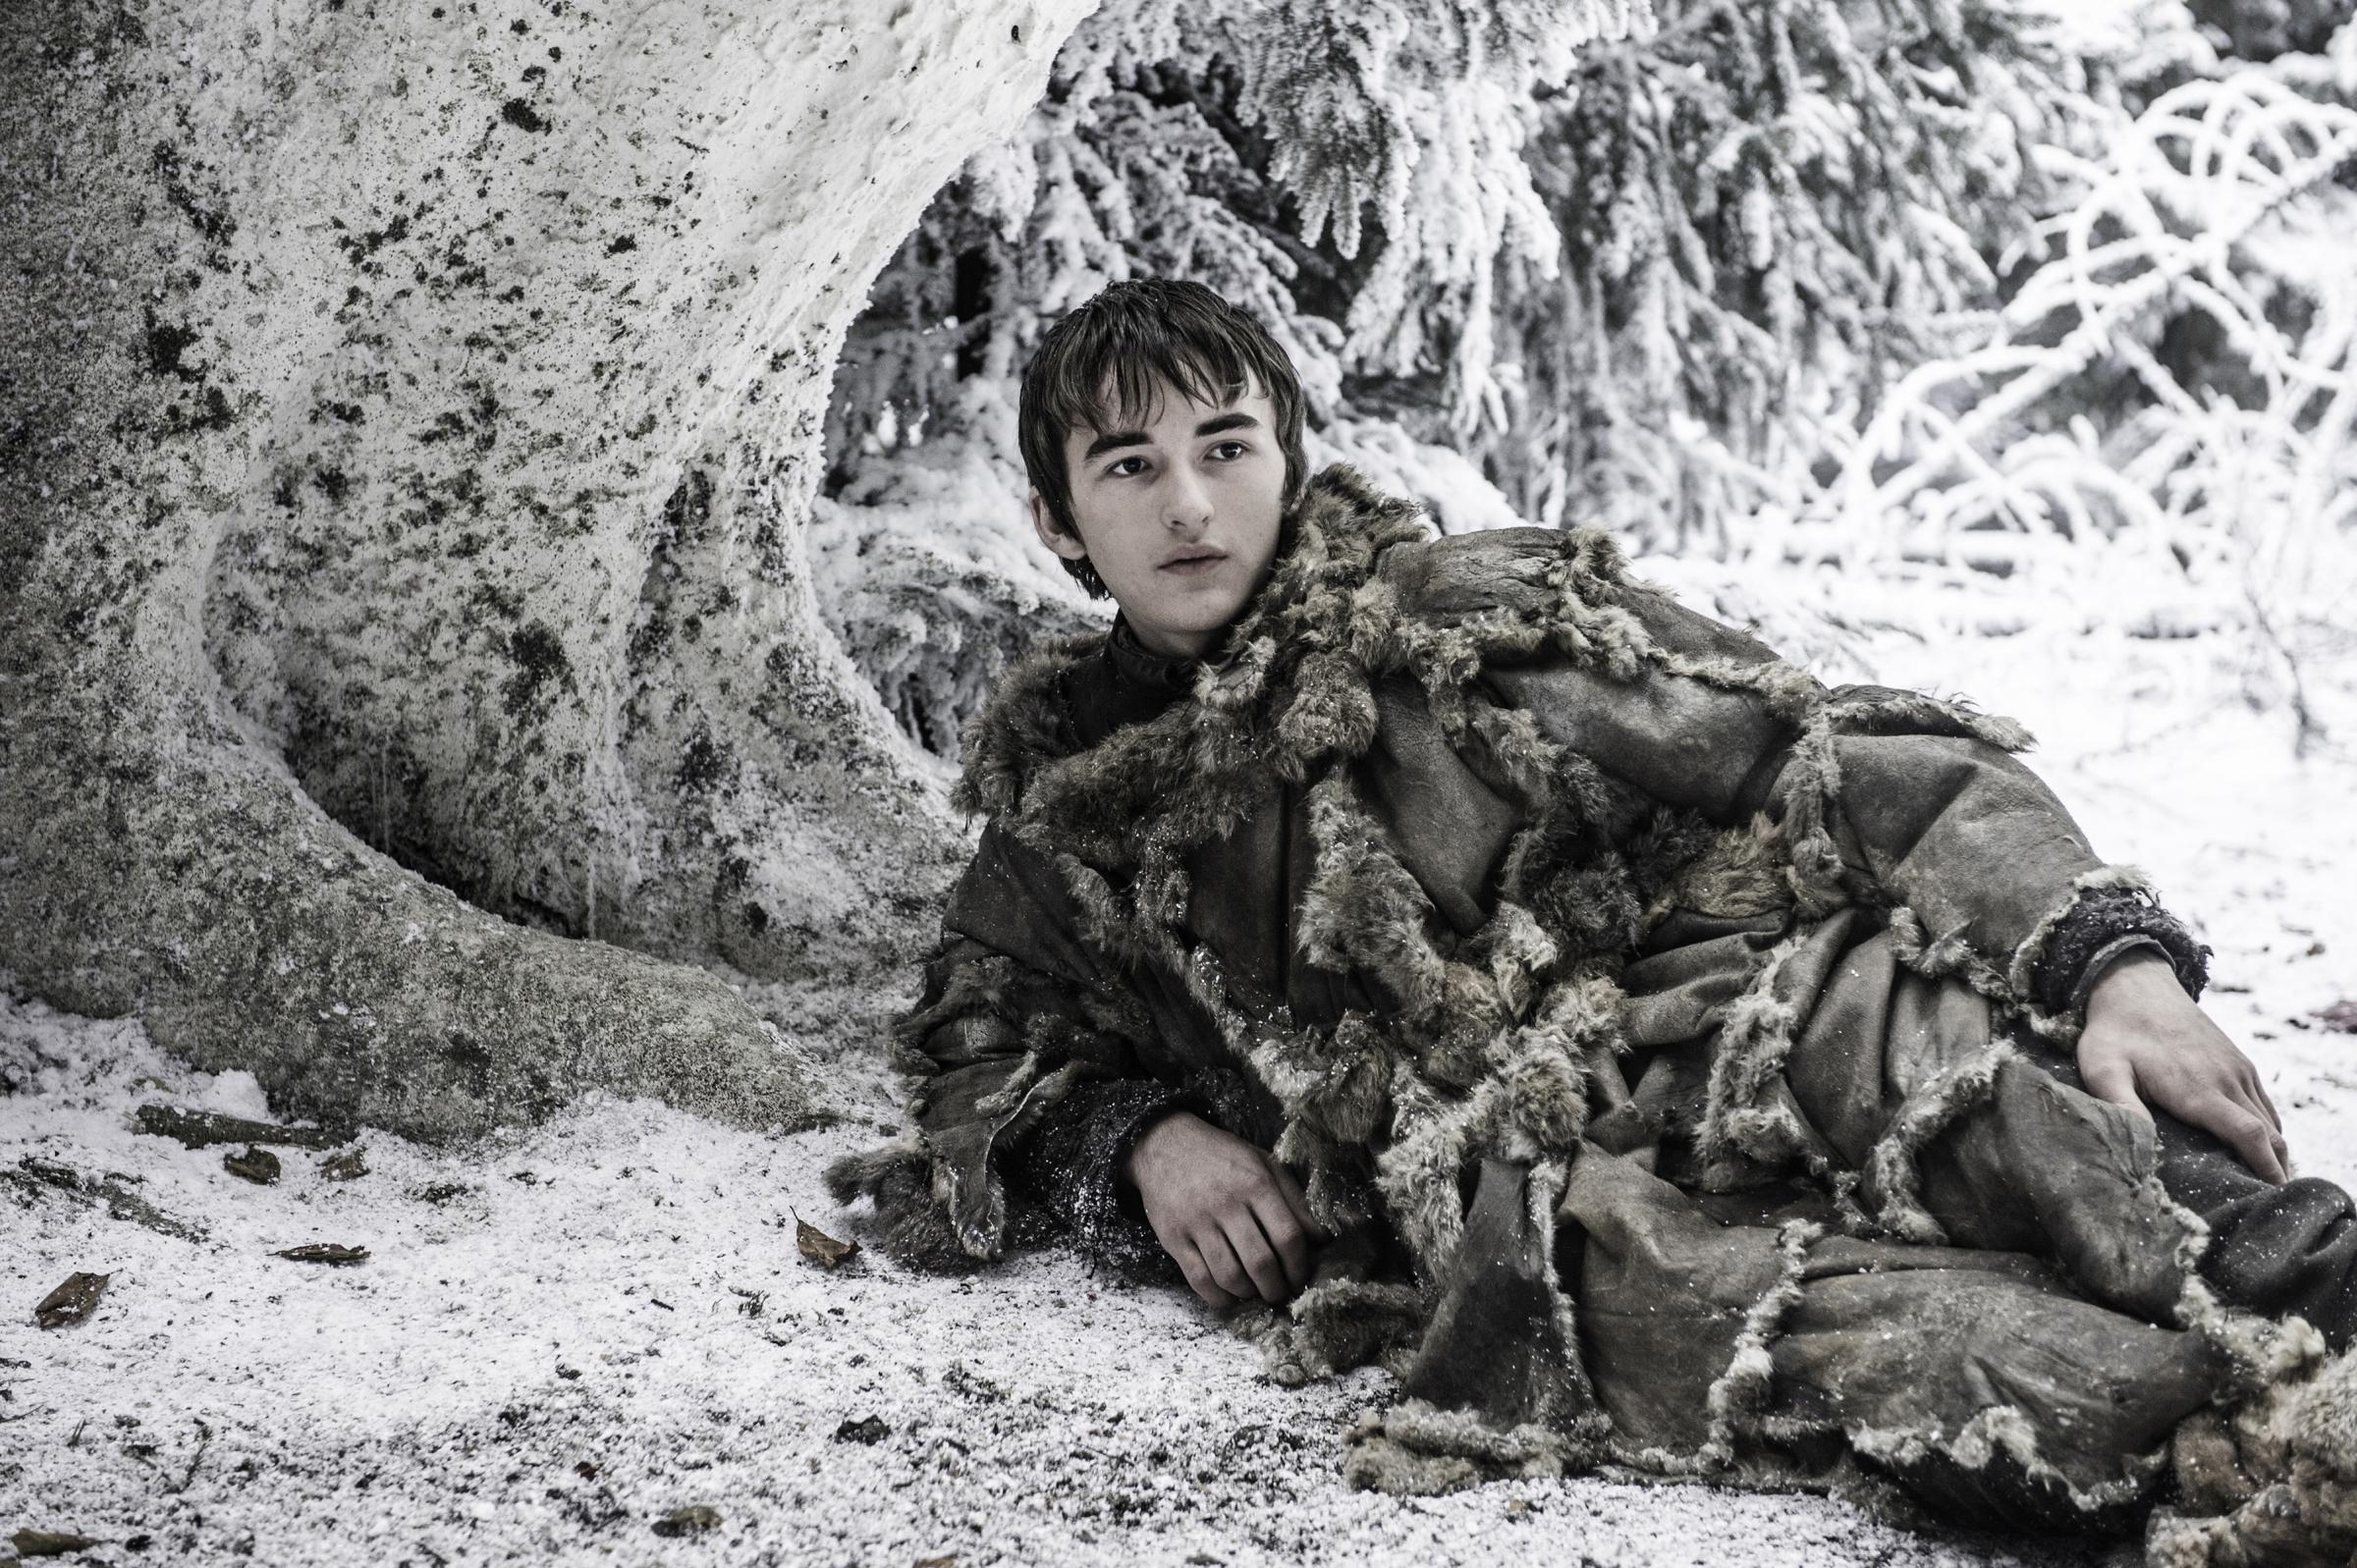 Isaac Hempstead Wright in Game of Thrones season 6, episode 10.